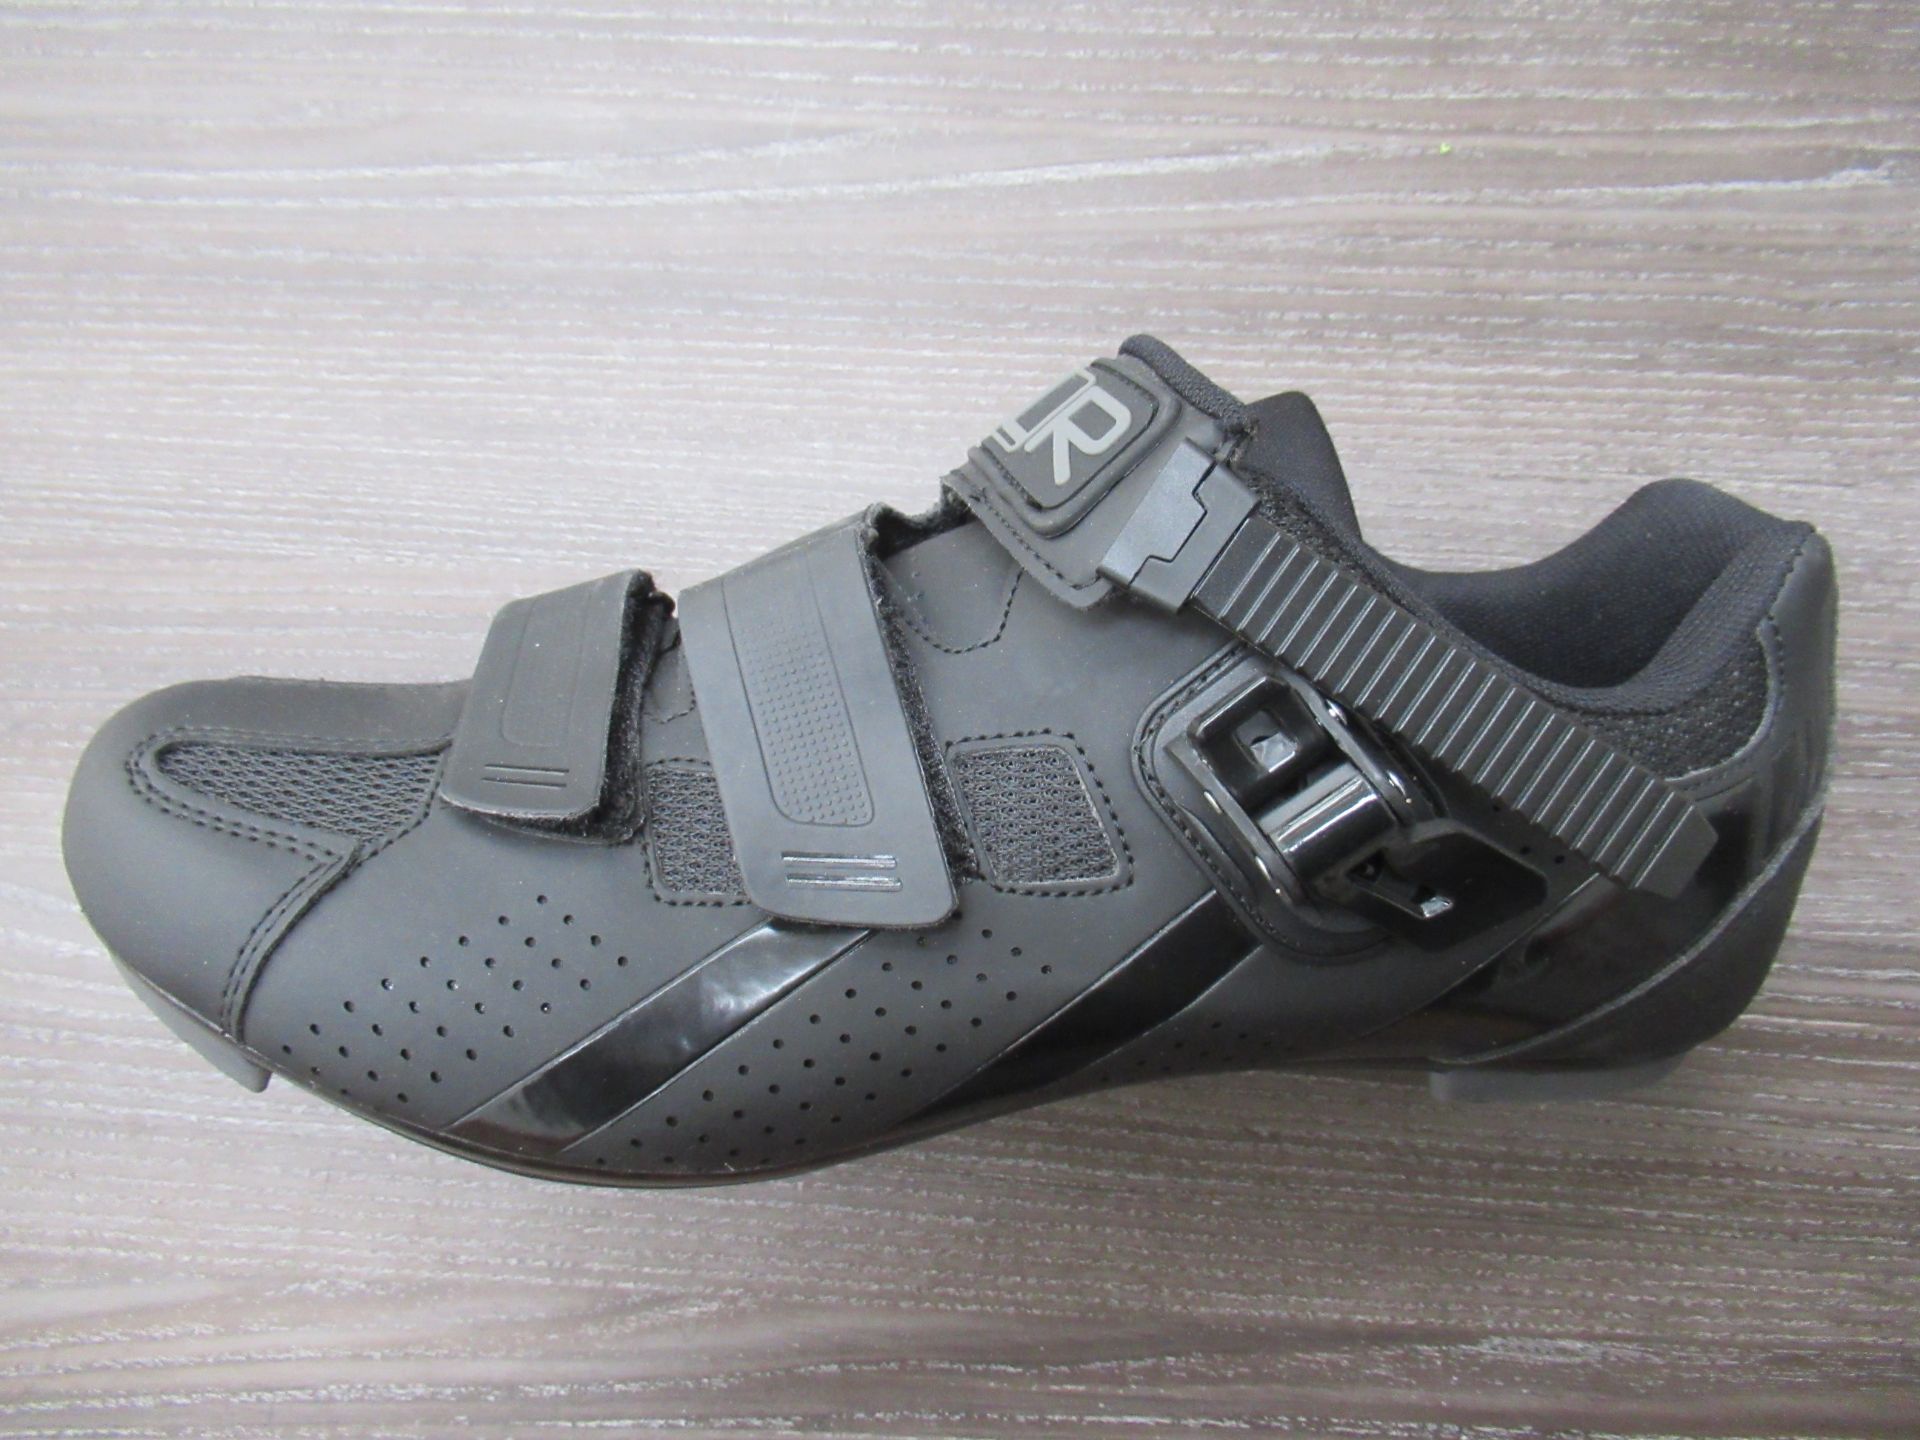 2 x Pairs of FLR cycling shoes - 1 x F-35 III boxed EU size 45 (RRP££64.99) and 1 x F-15 III boxed E - Image 7 of 7